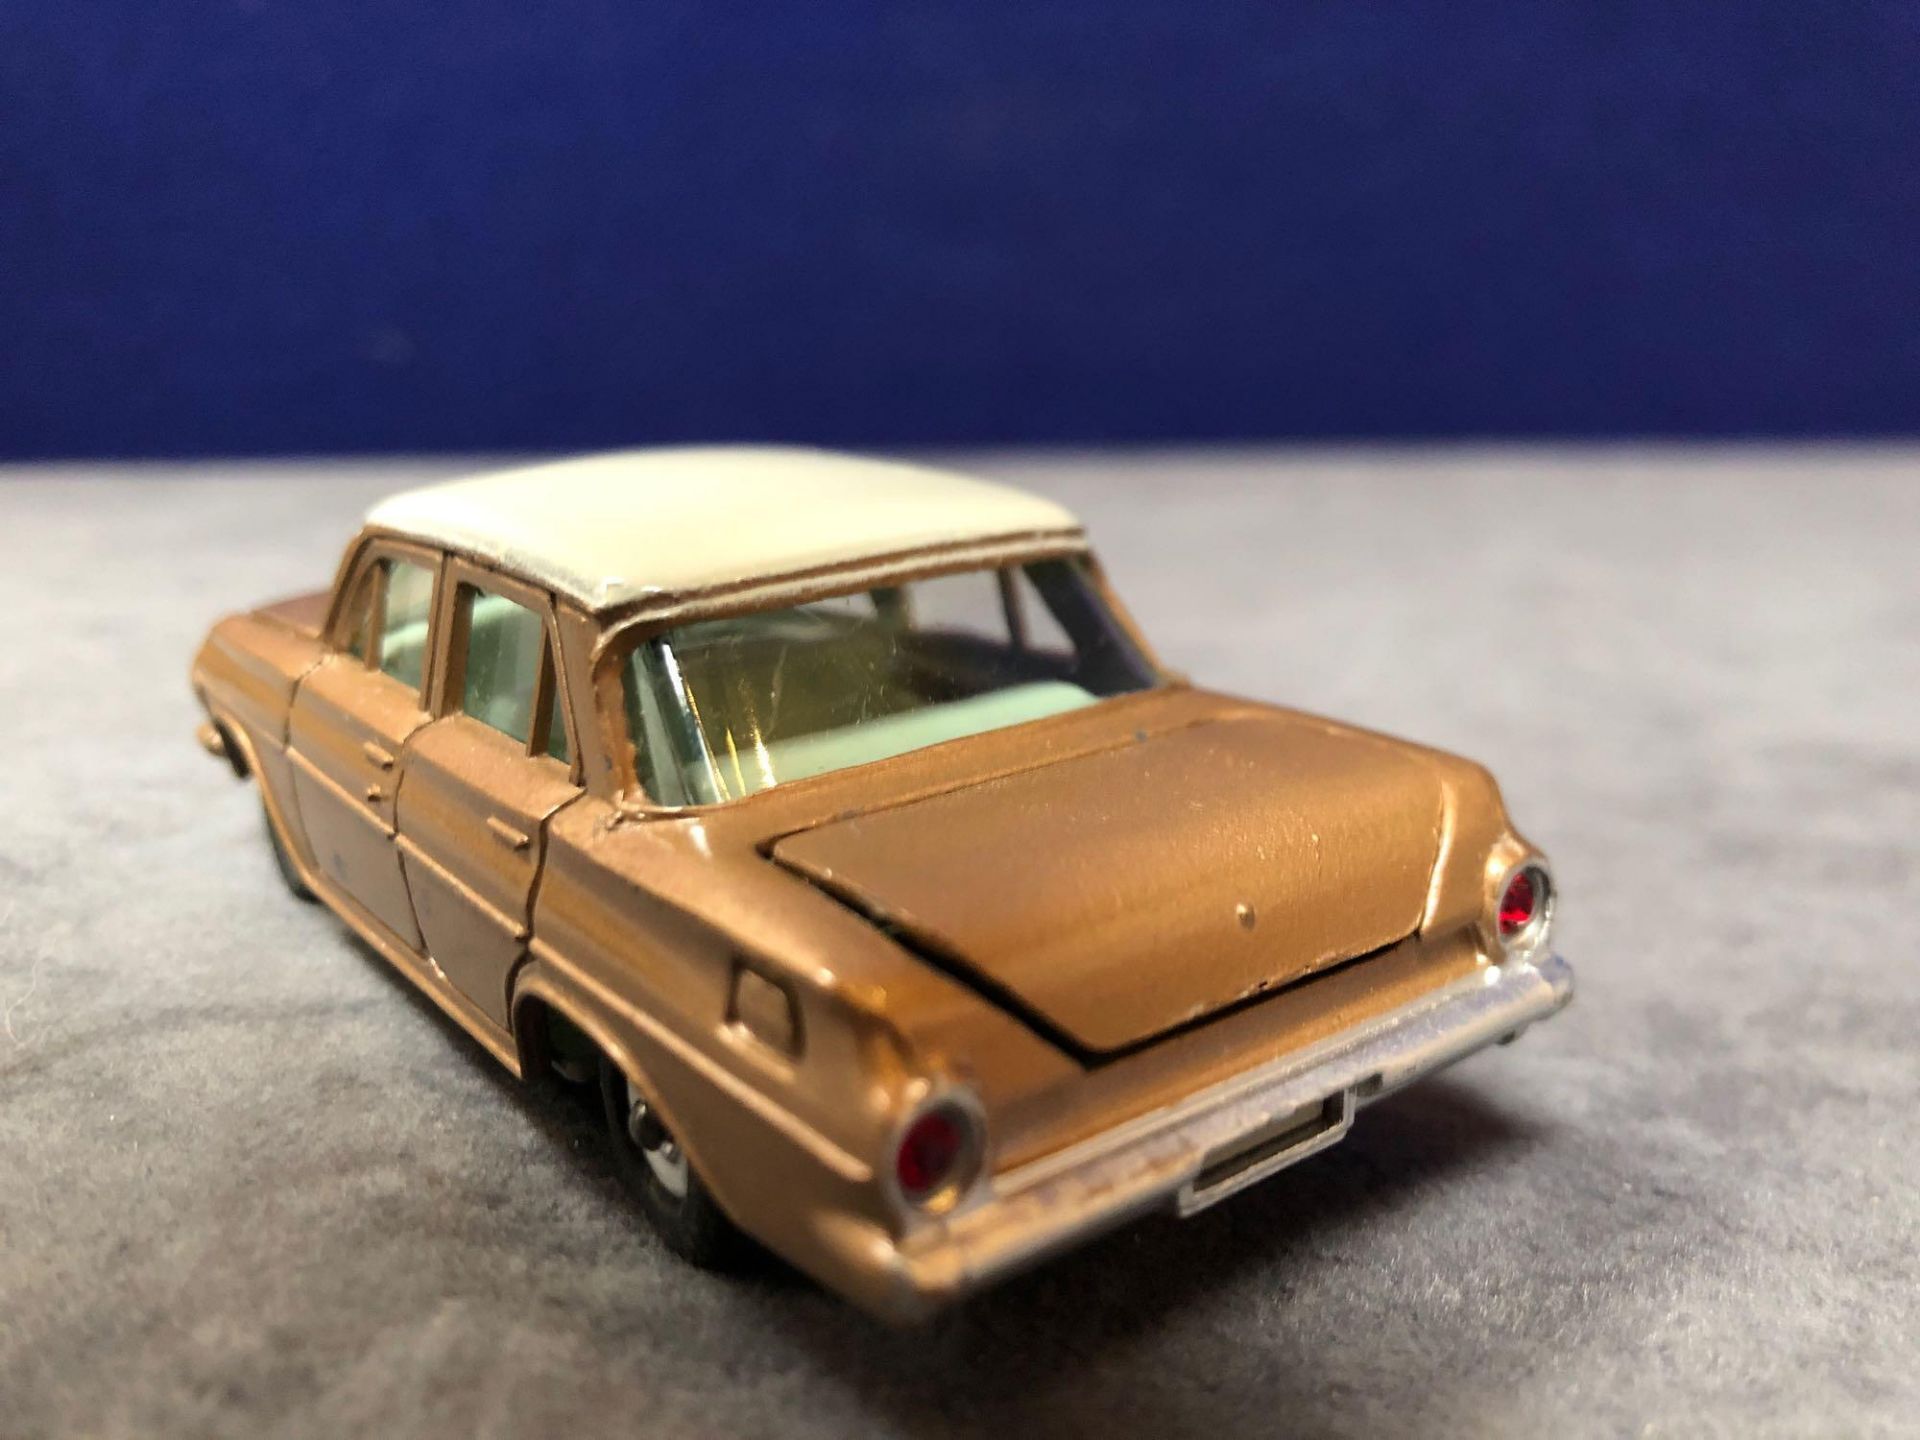 Dinky #196 Holden Special Sedan Bronze/White Or Turquoise/White - Jewelled Headlights (No - Image 3 of 4